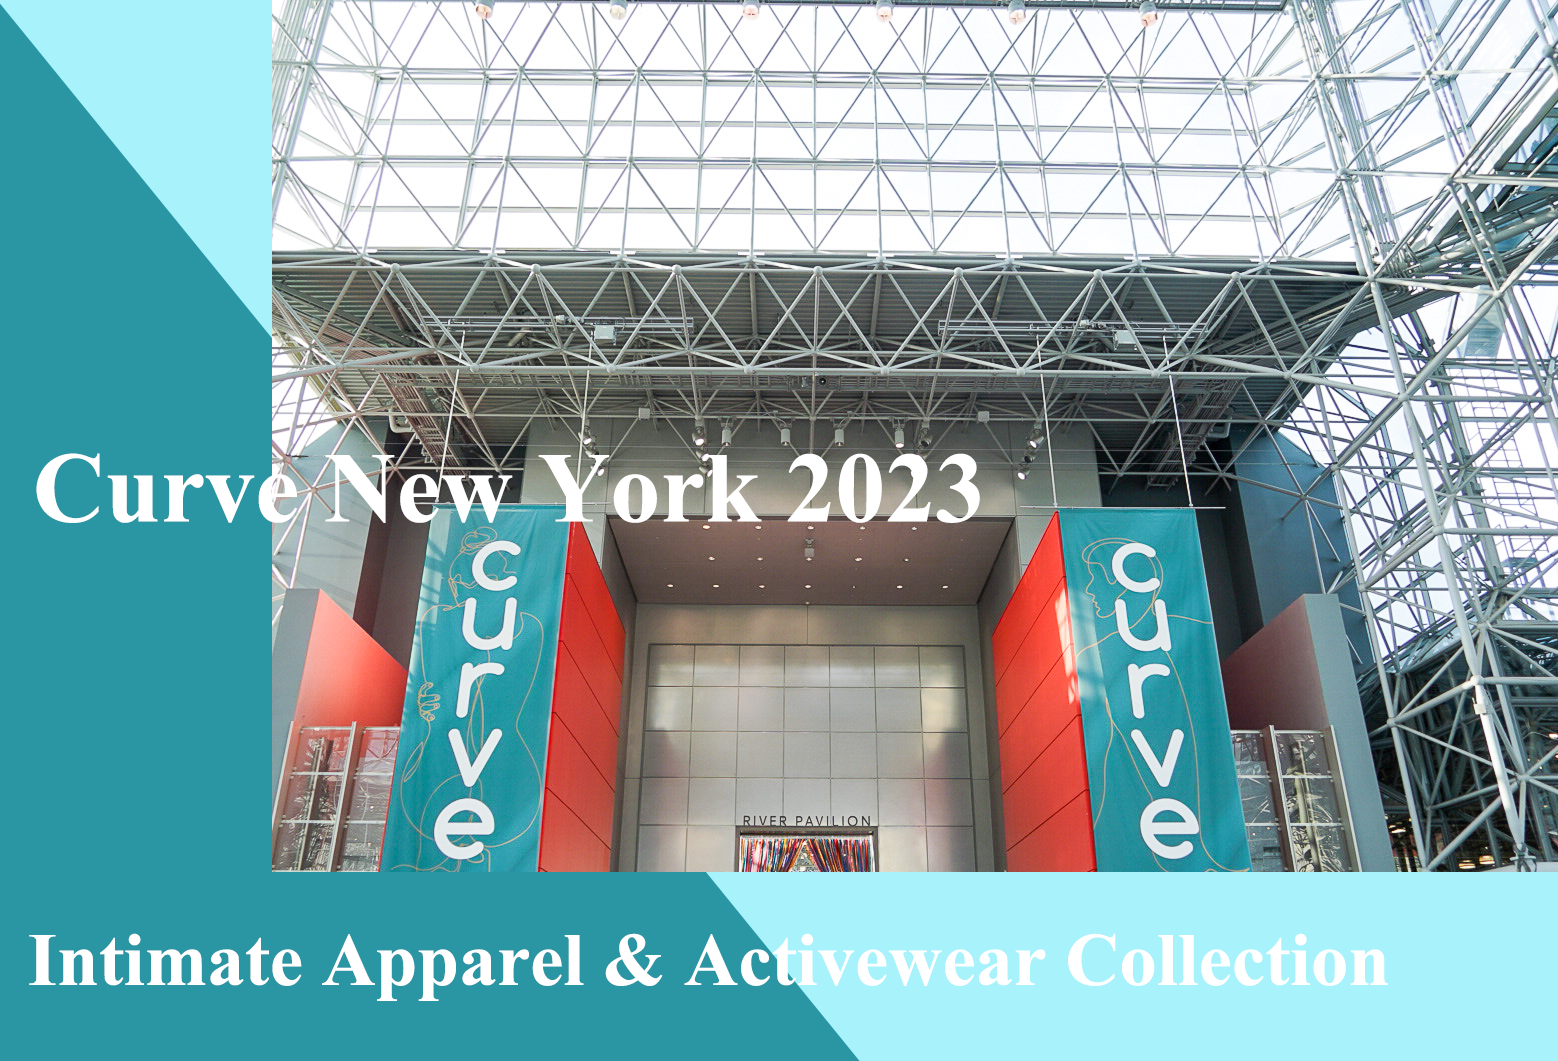 The Analysis of Curve New York 2023